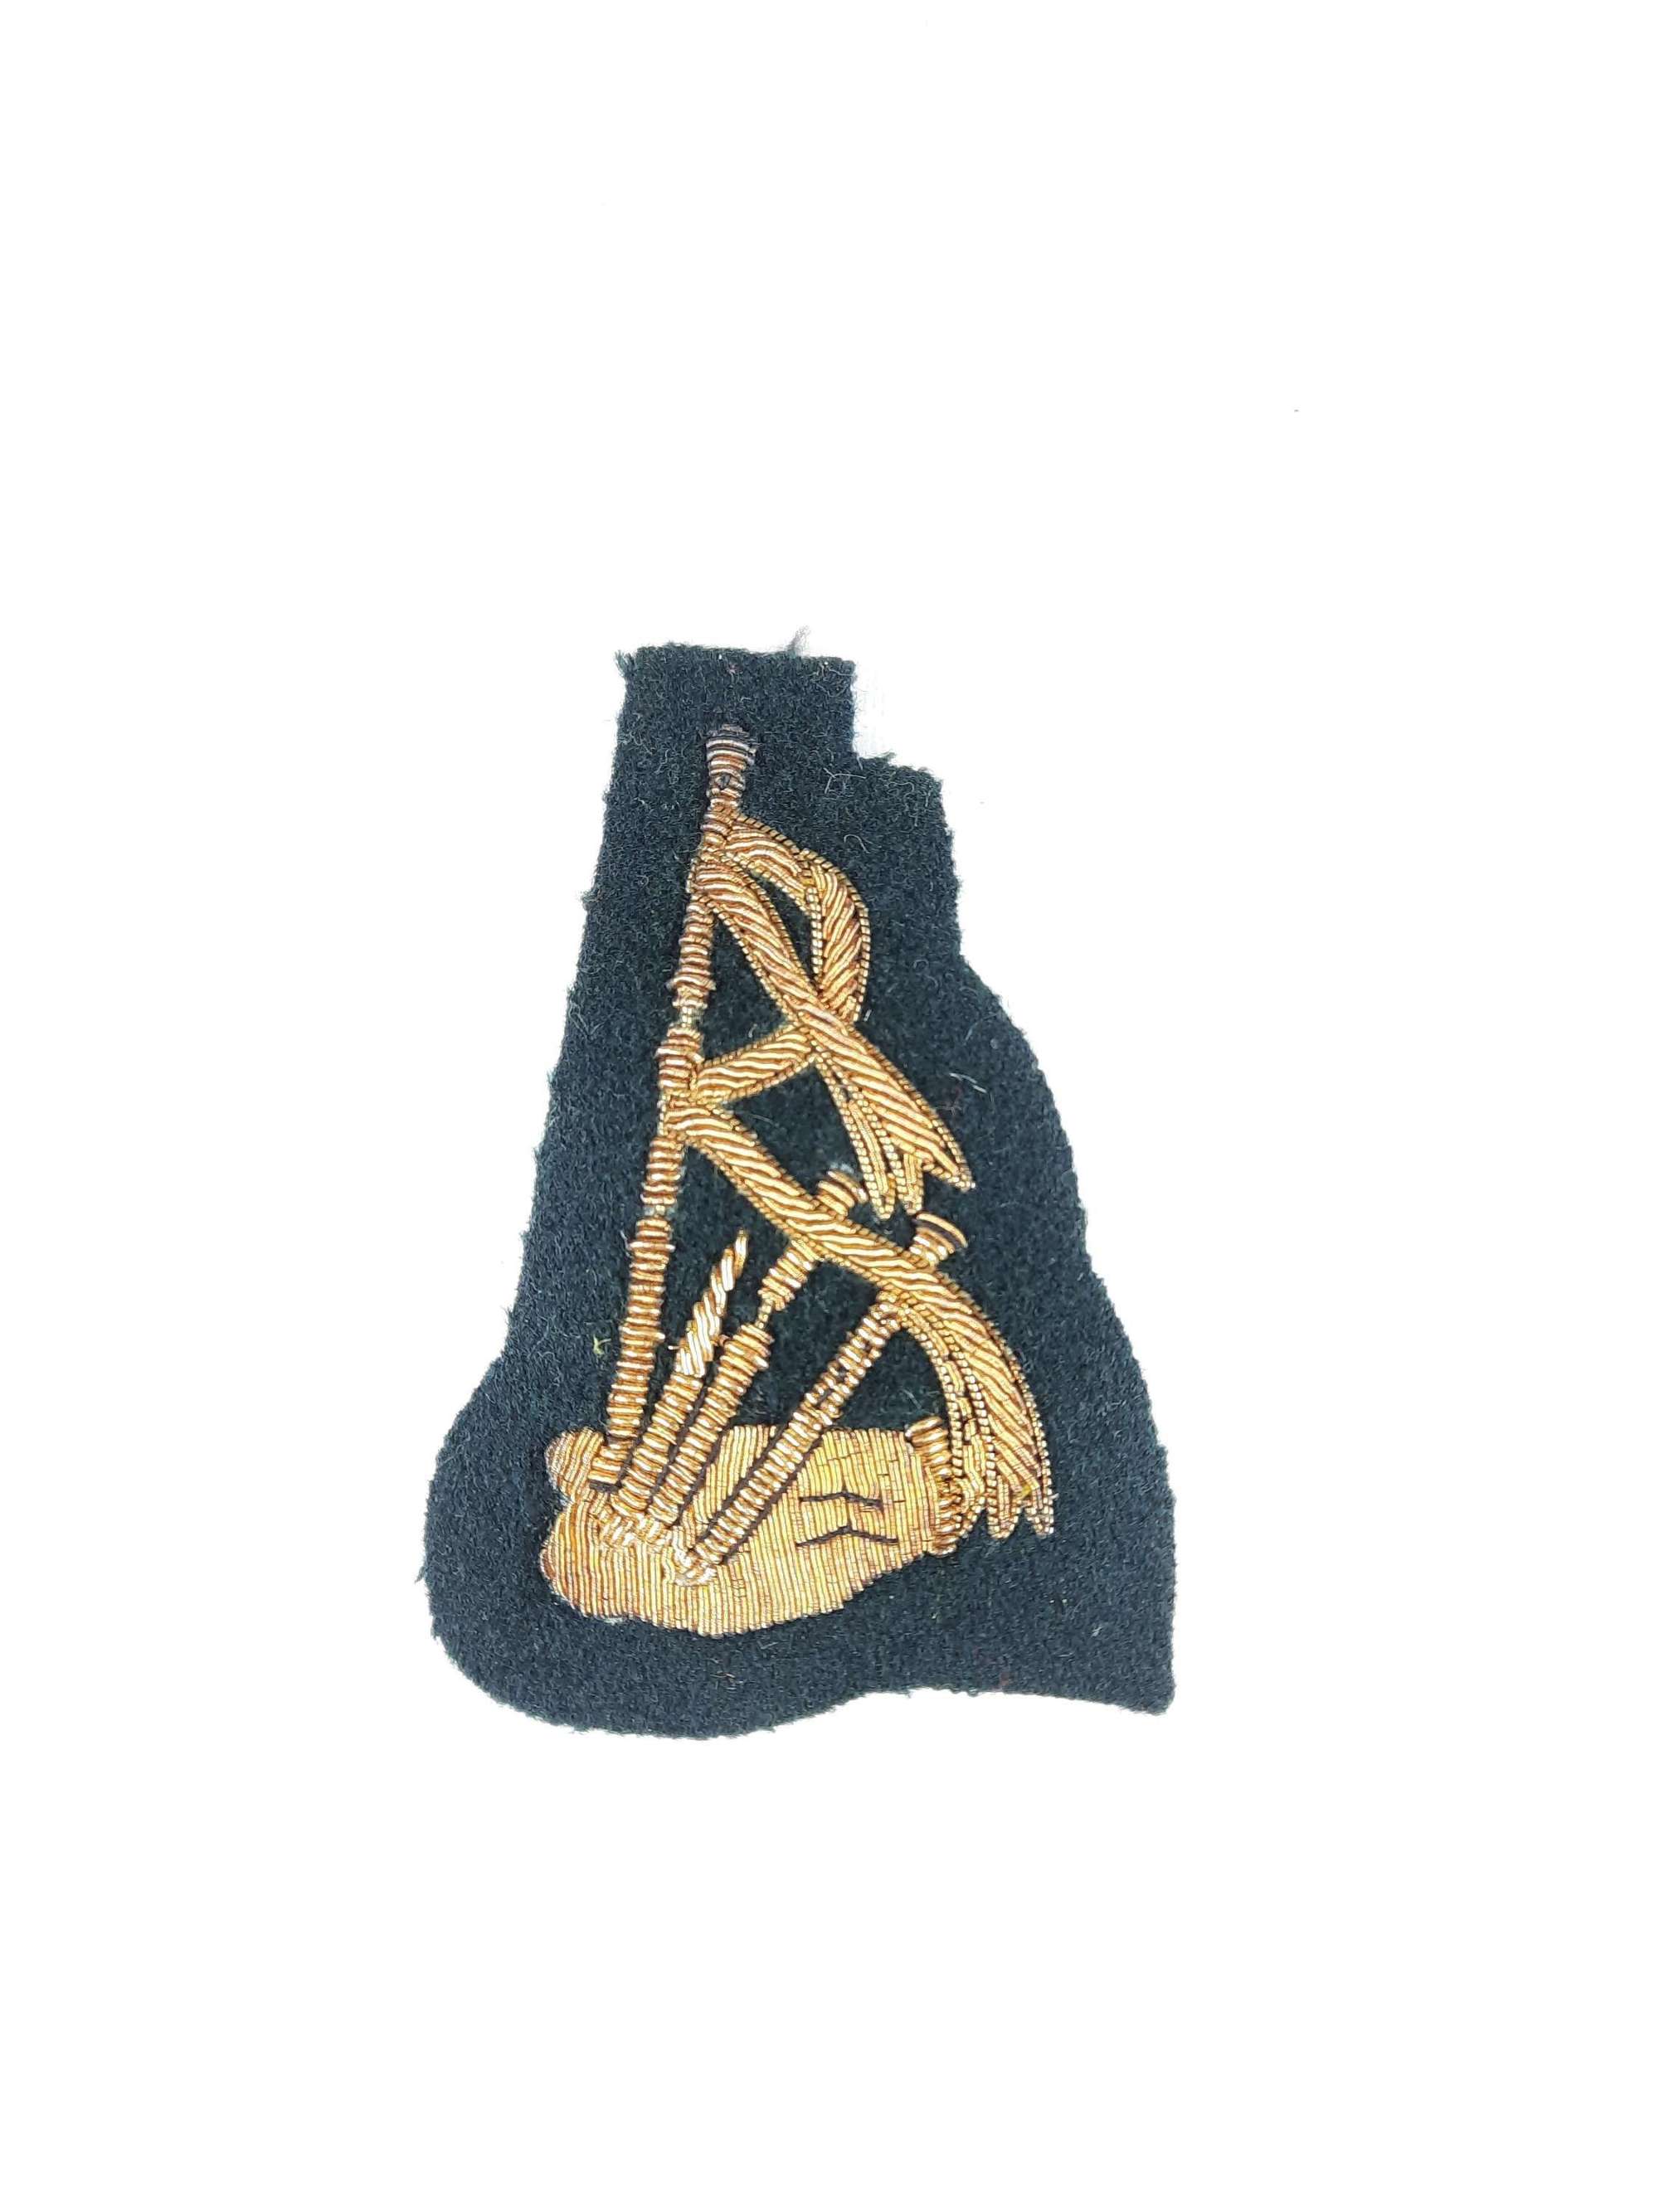 British Army Piper Sleeve Patch